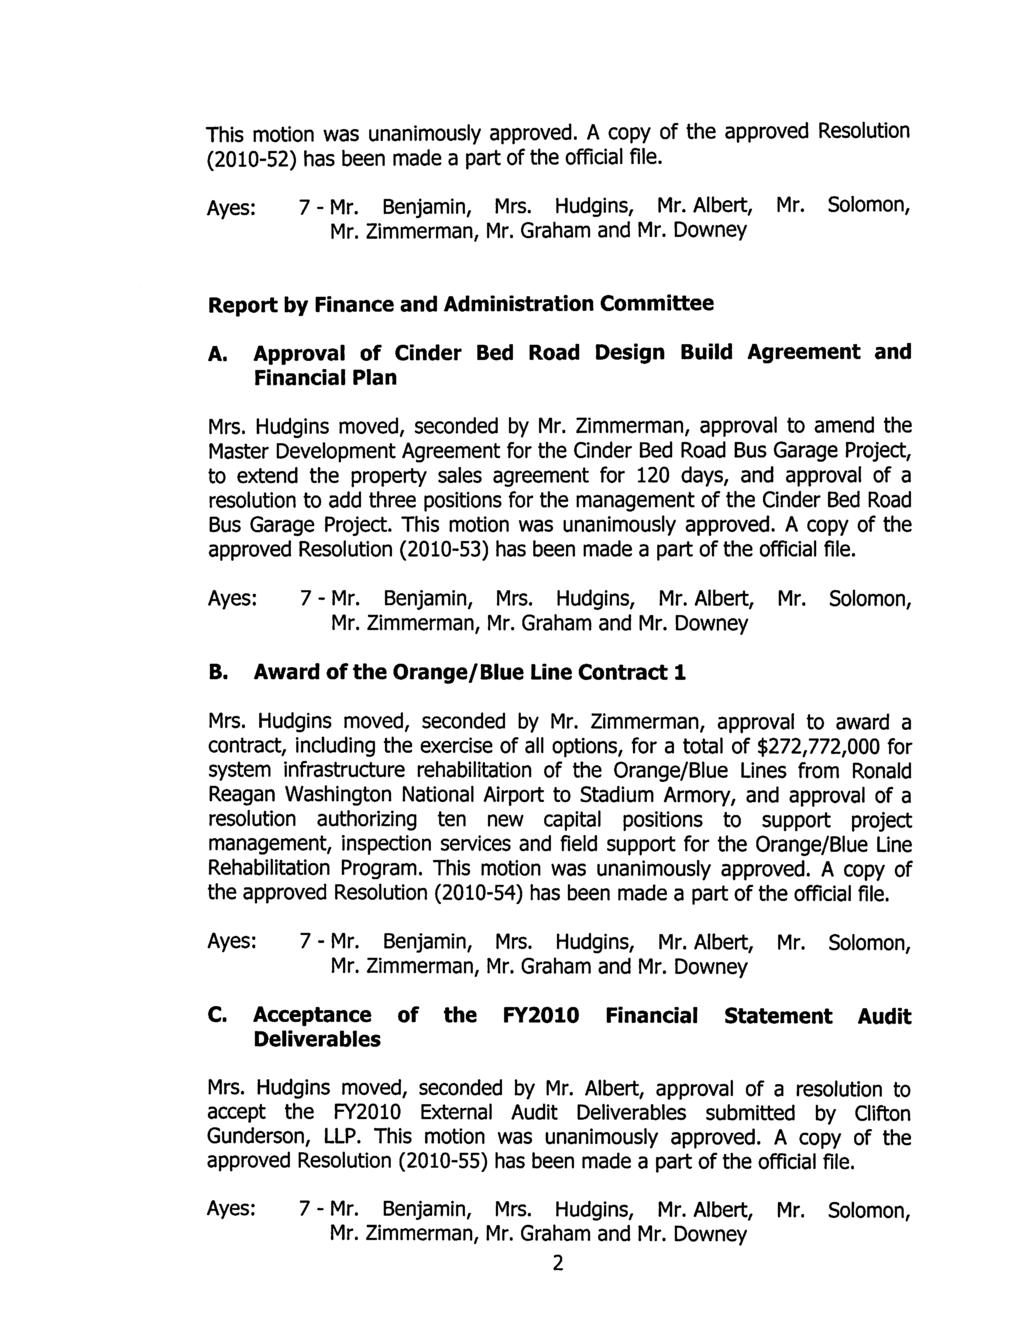 This motion was unanimously approved. A copy of the approved Resolution (2010-52) has been made a part of the official file. Report by Finance and Administration Committee A.